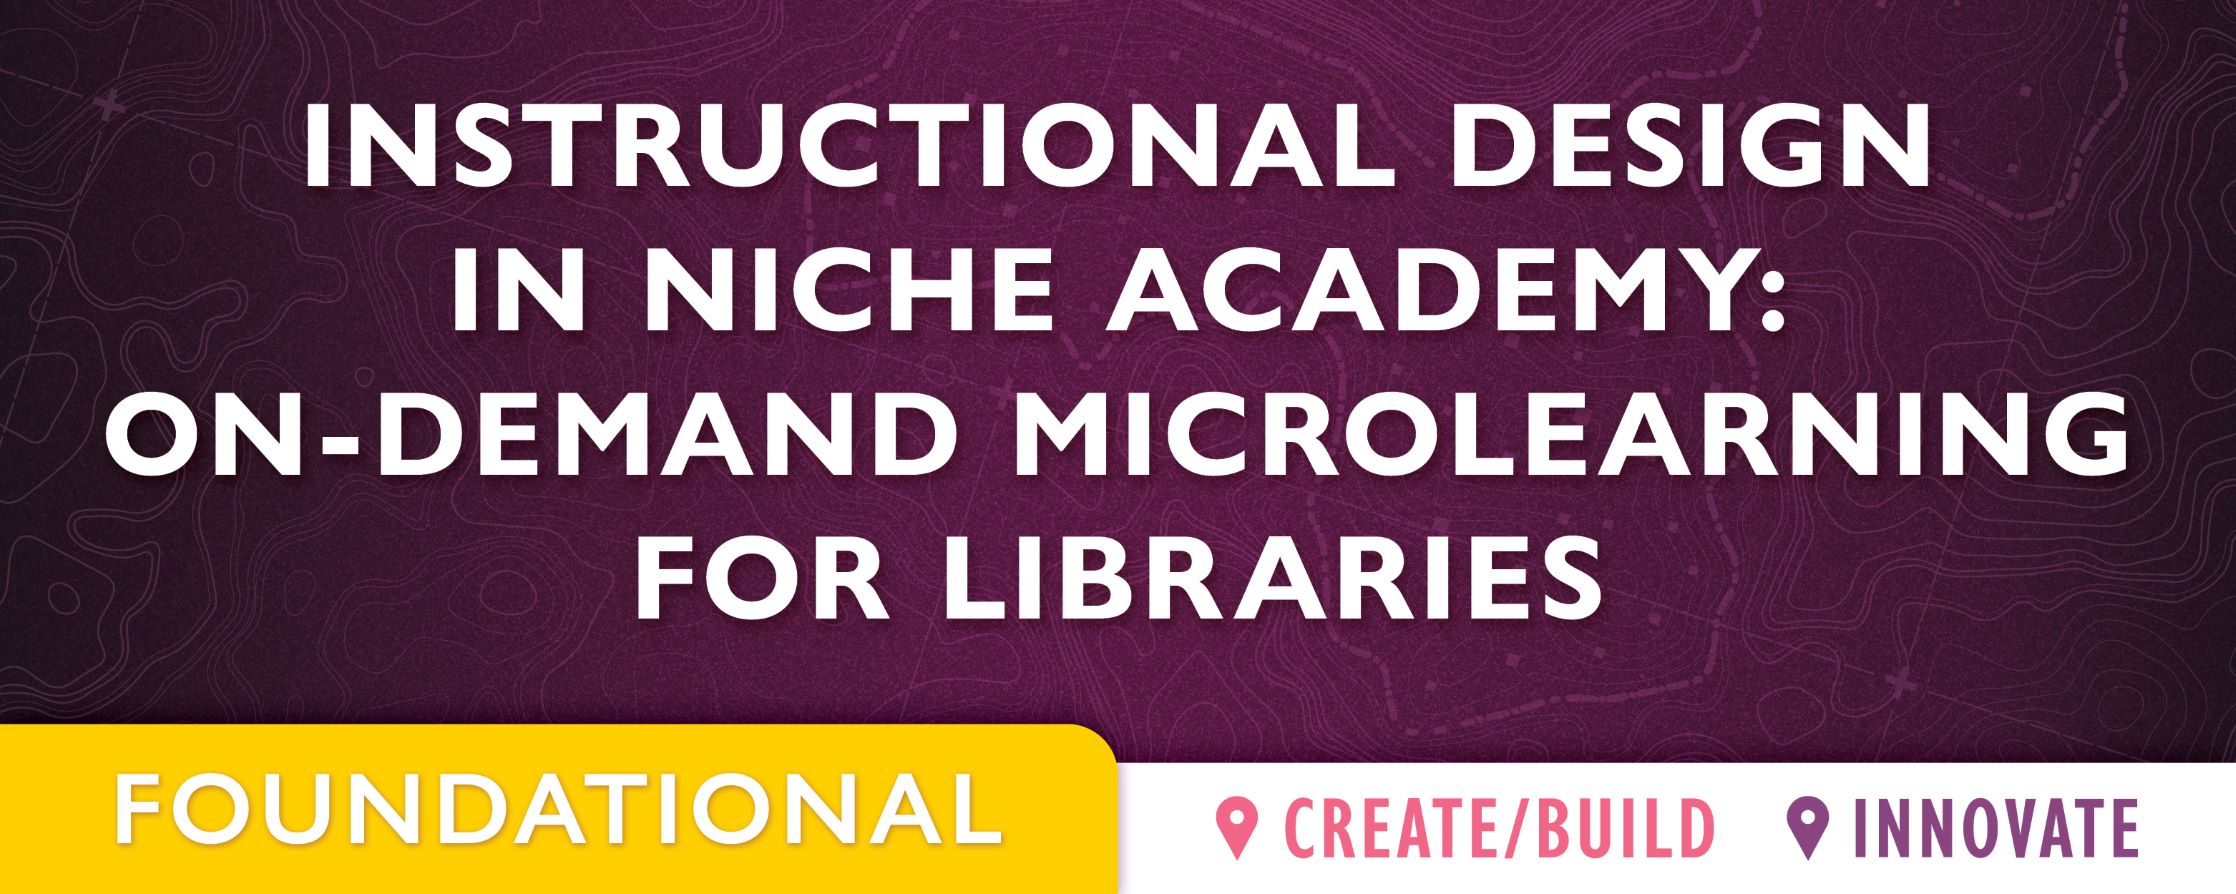 purple background with text: Instructional Design in Niche Academy: On-demand Microlearning for Libraries 